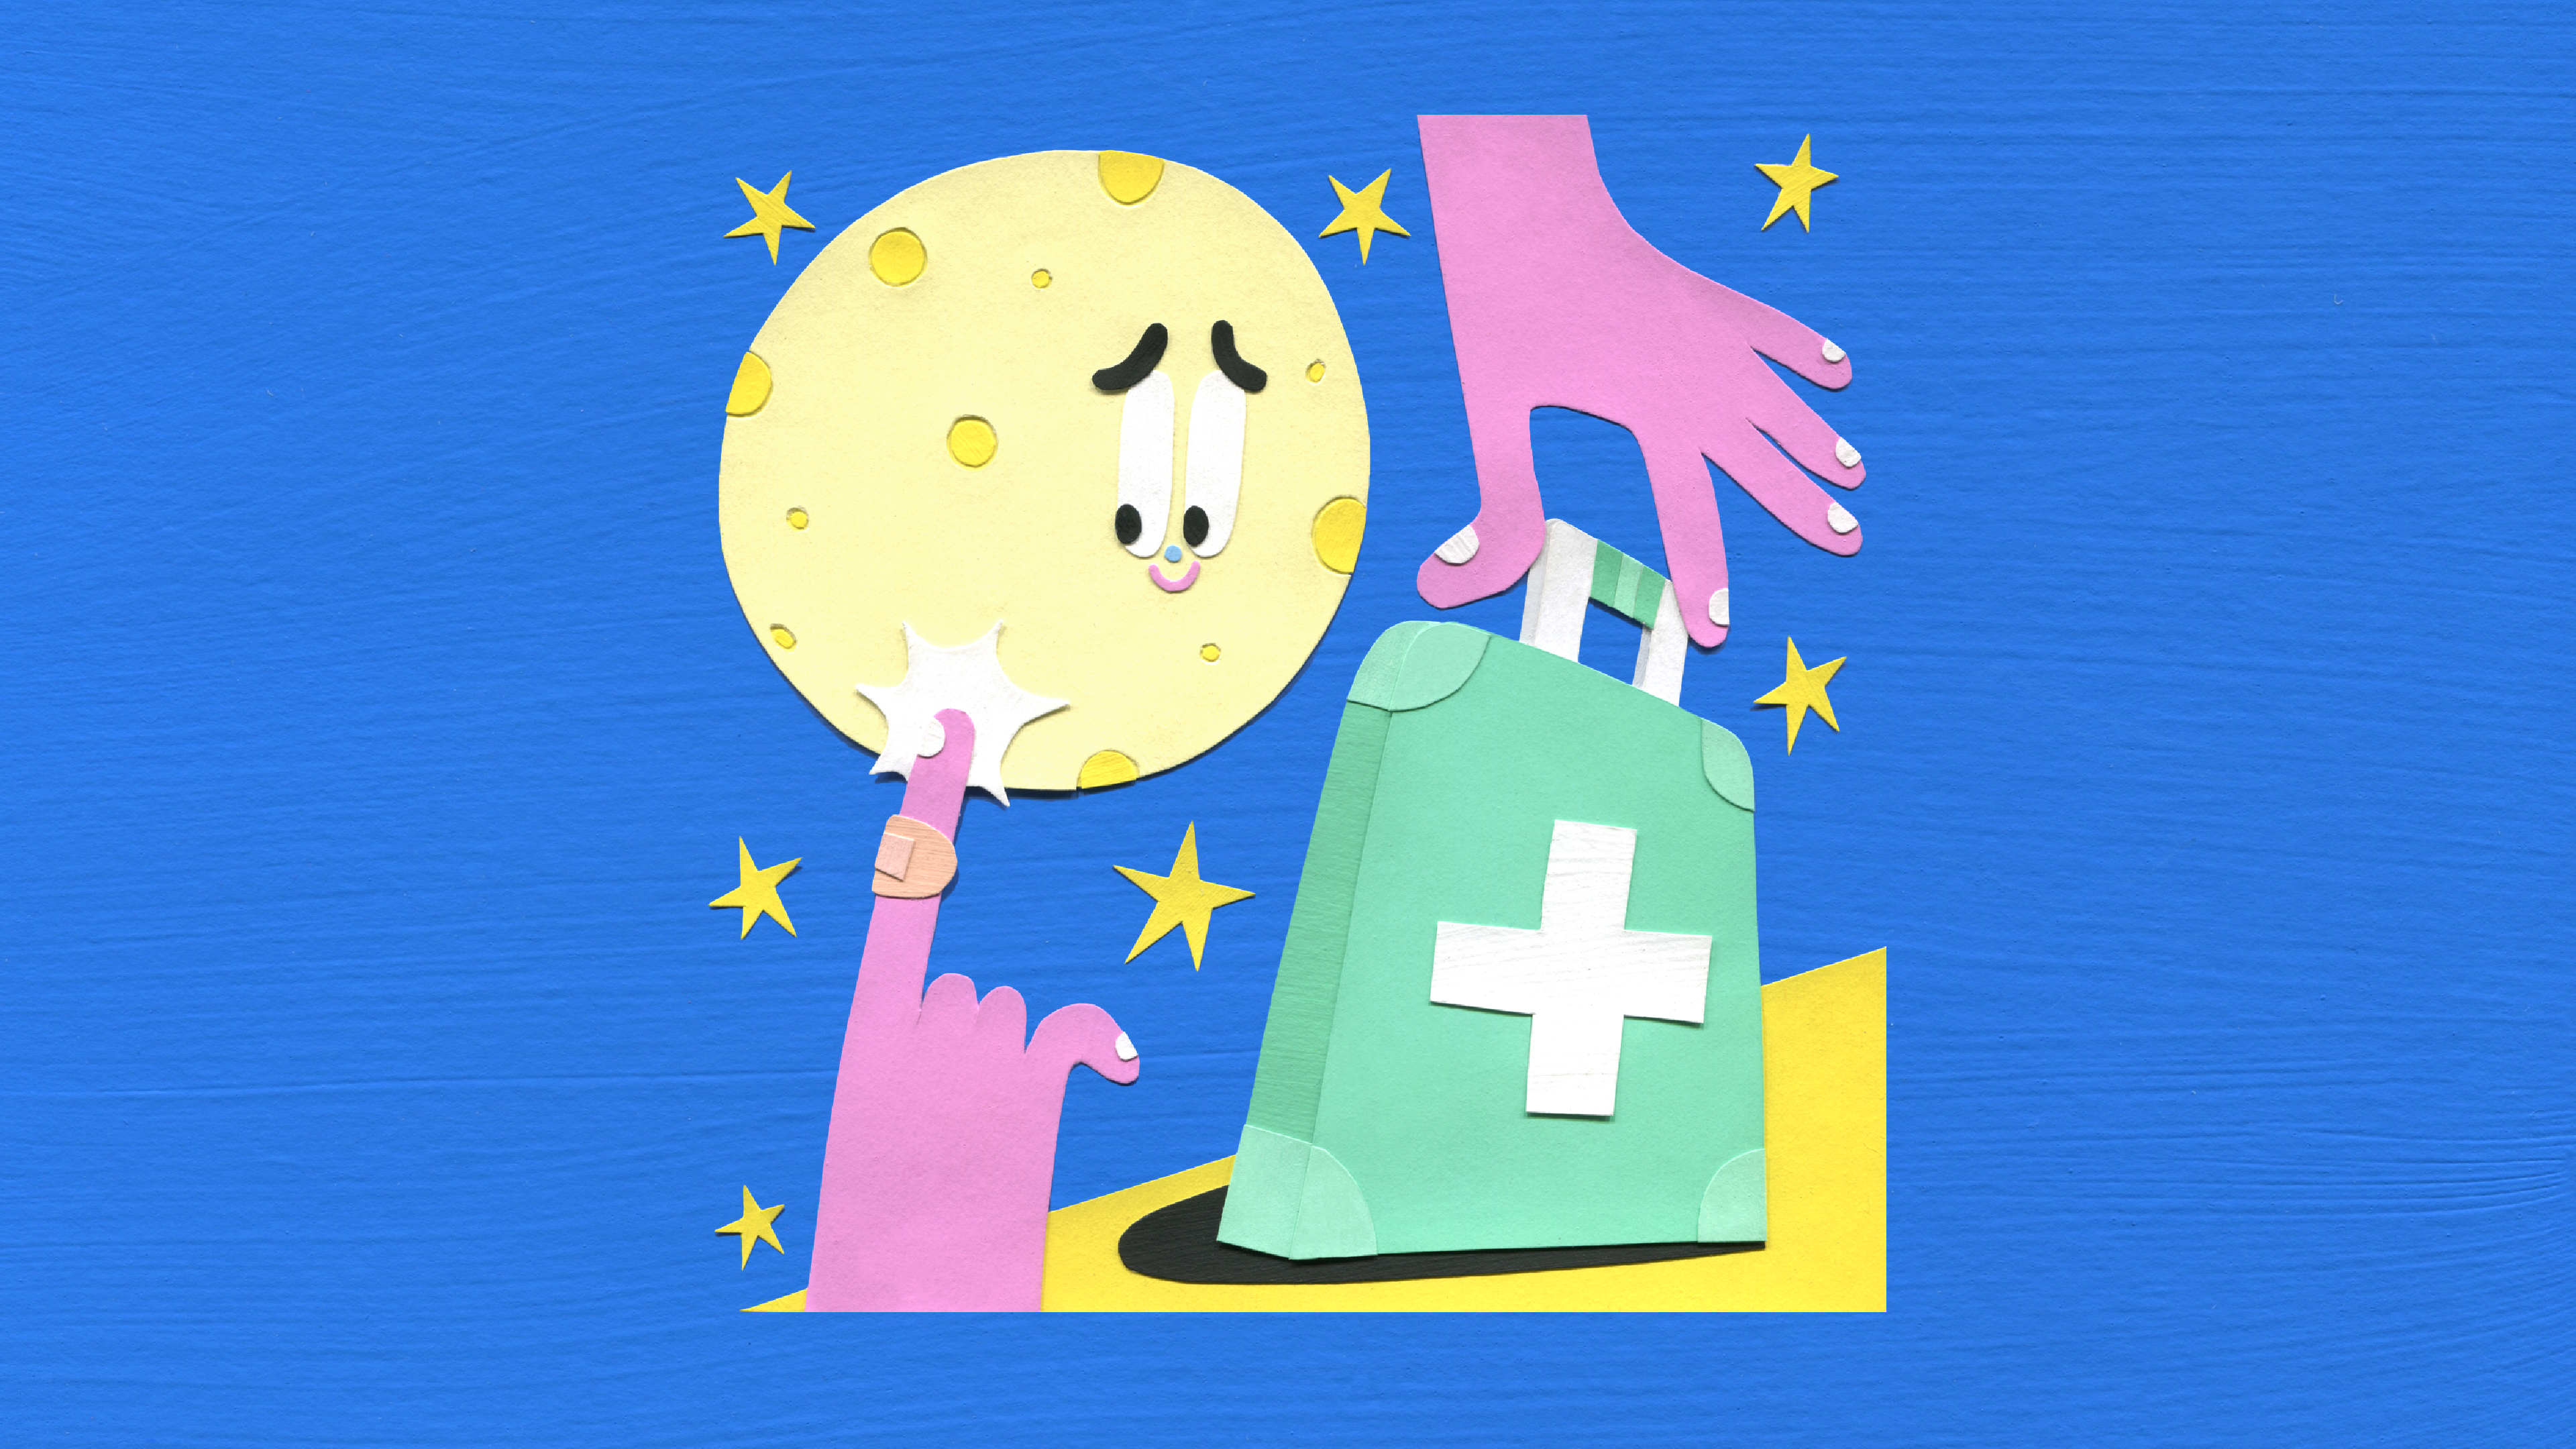 A drawing of two hands, one holding a first aid kit, the other touching the moon.